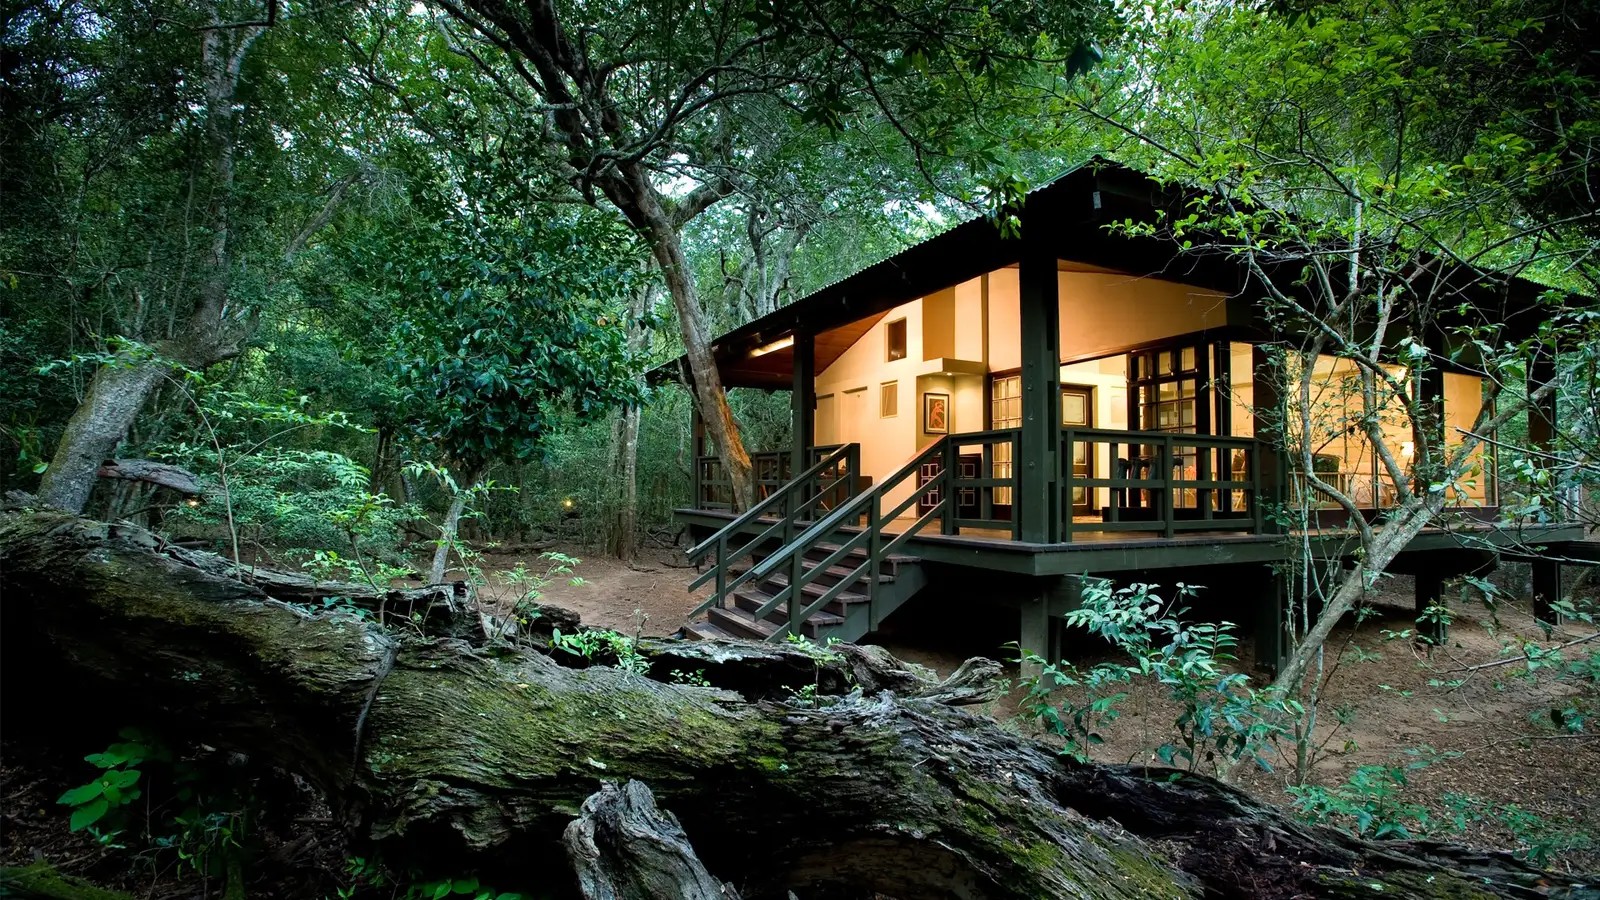 AndBeyond Phinda Forest Lodge